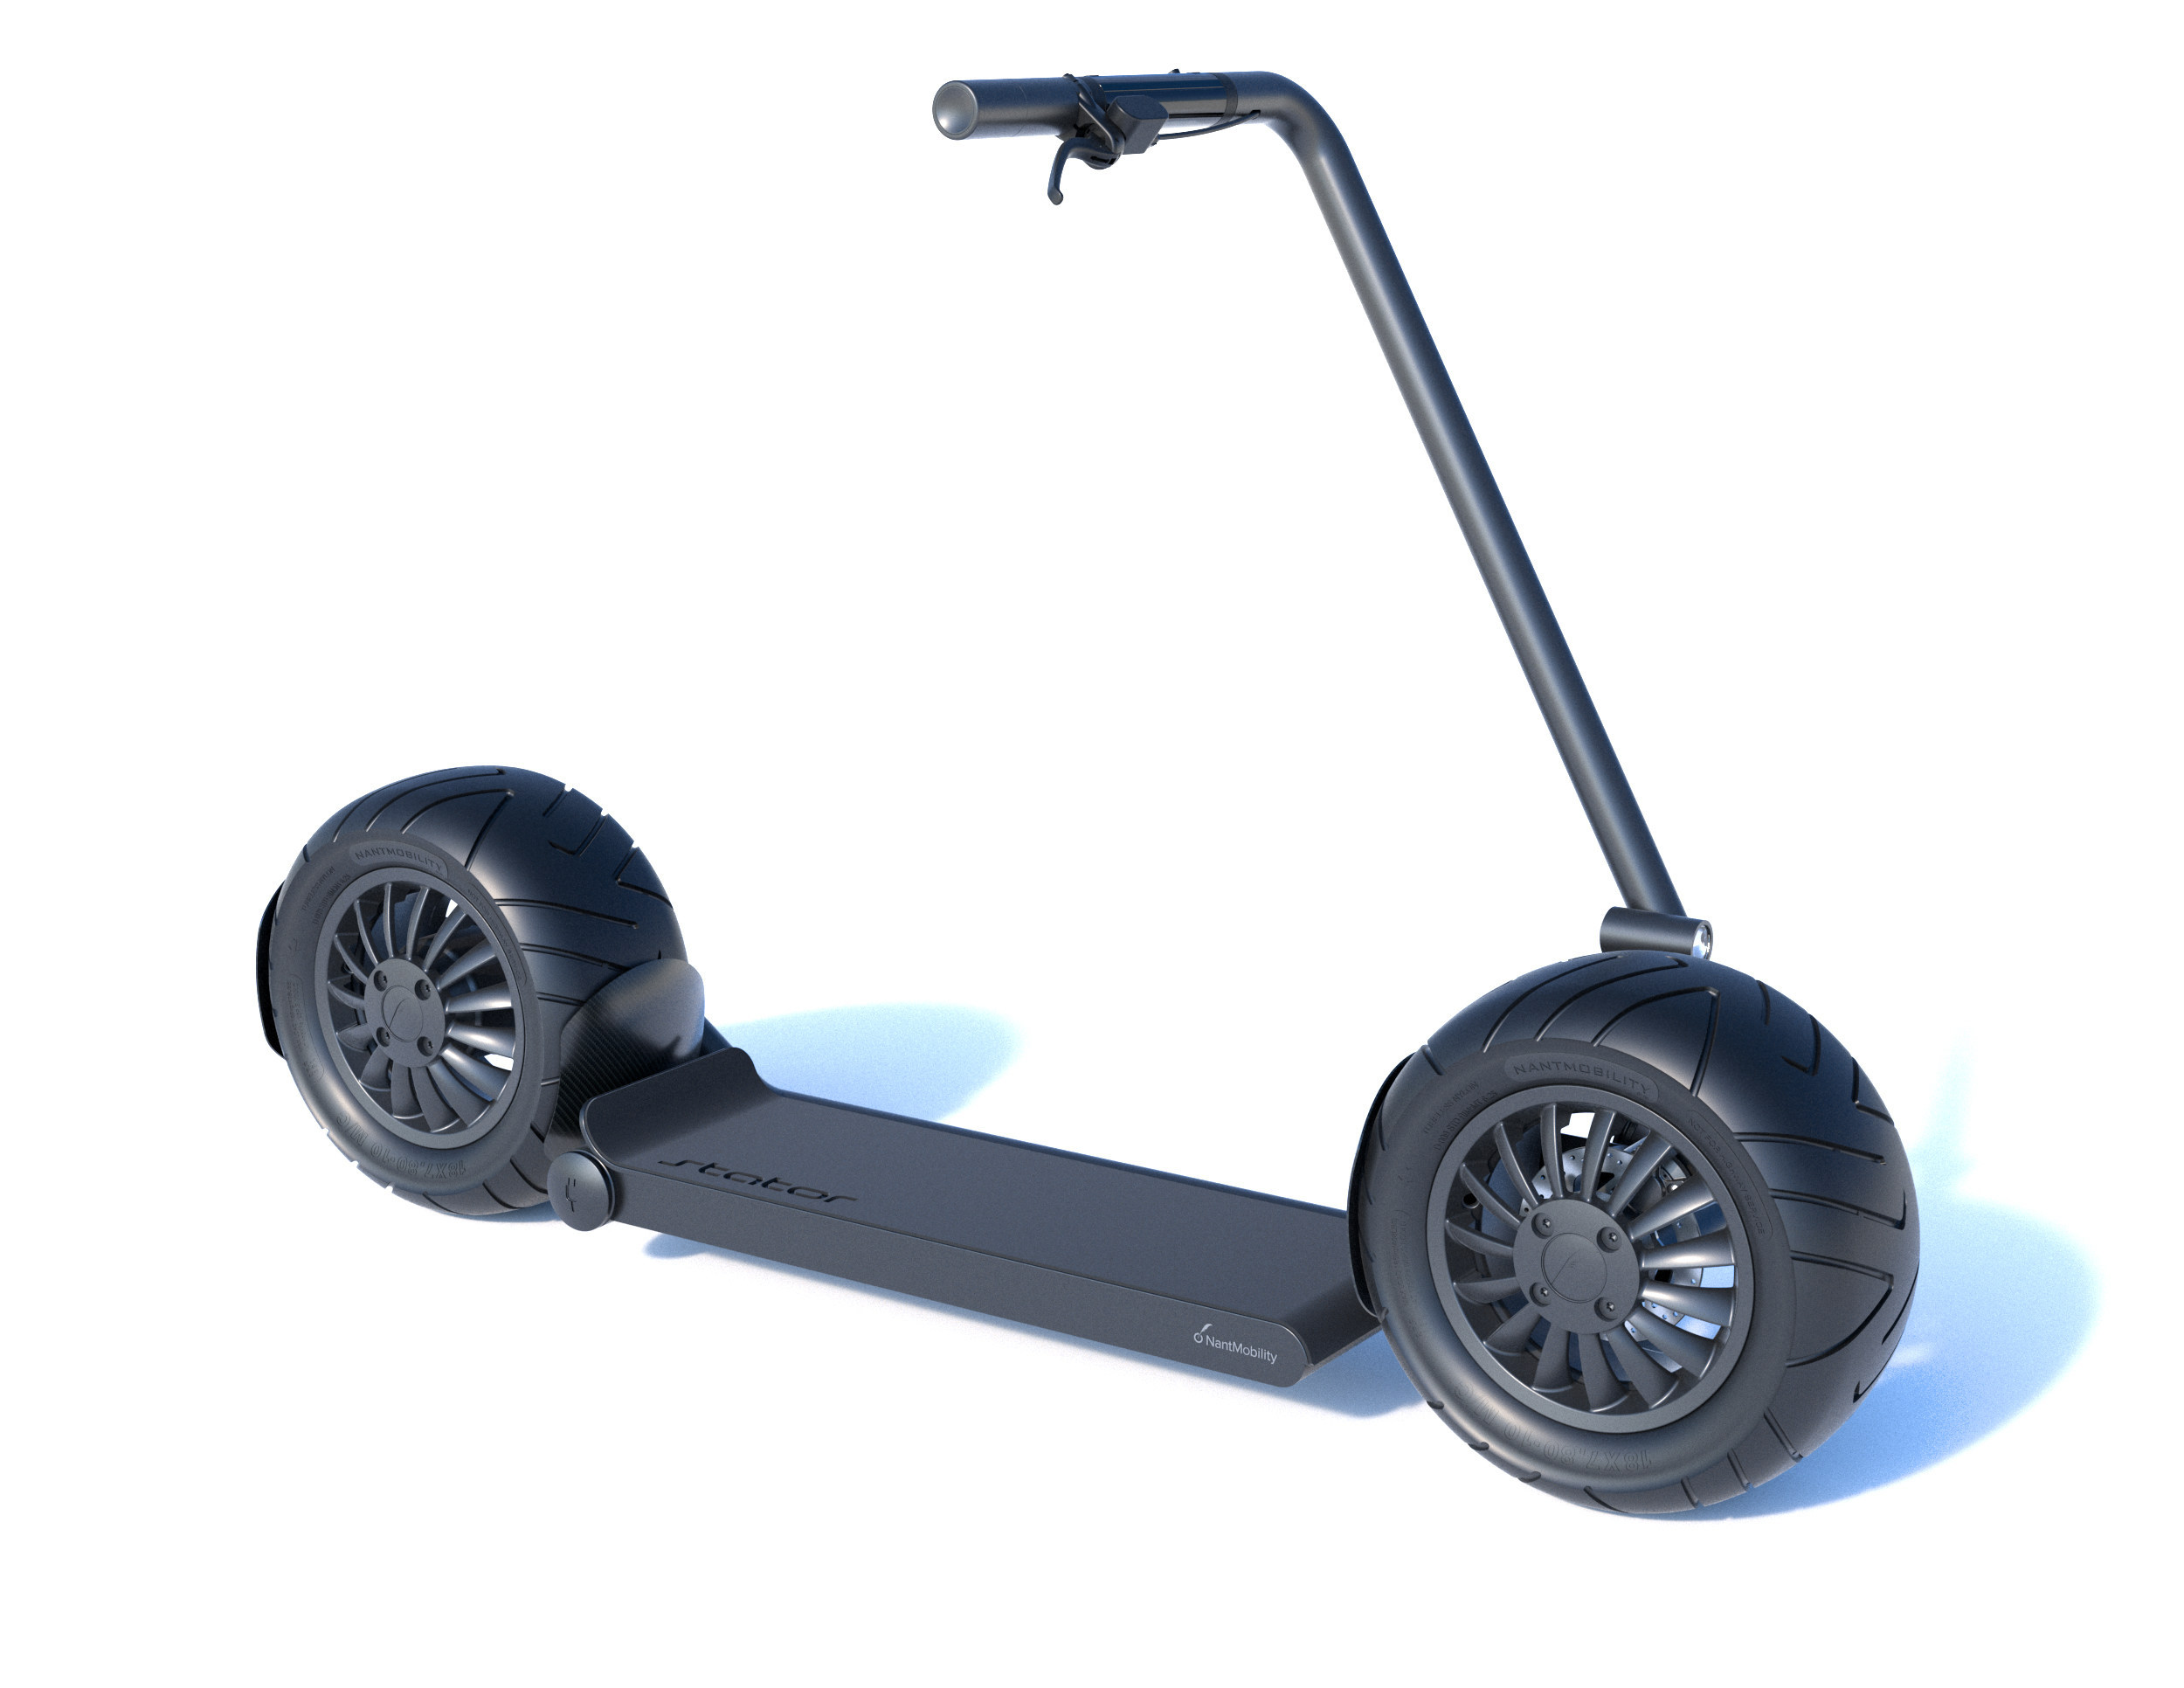 NantMobility Announces Release of Groundbreaking Micromobility Scooter